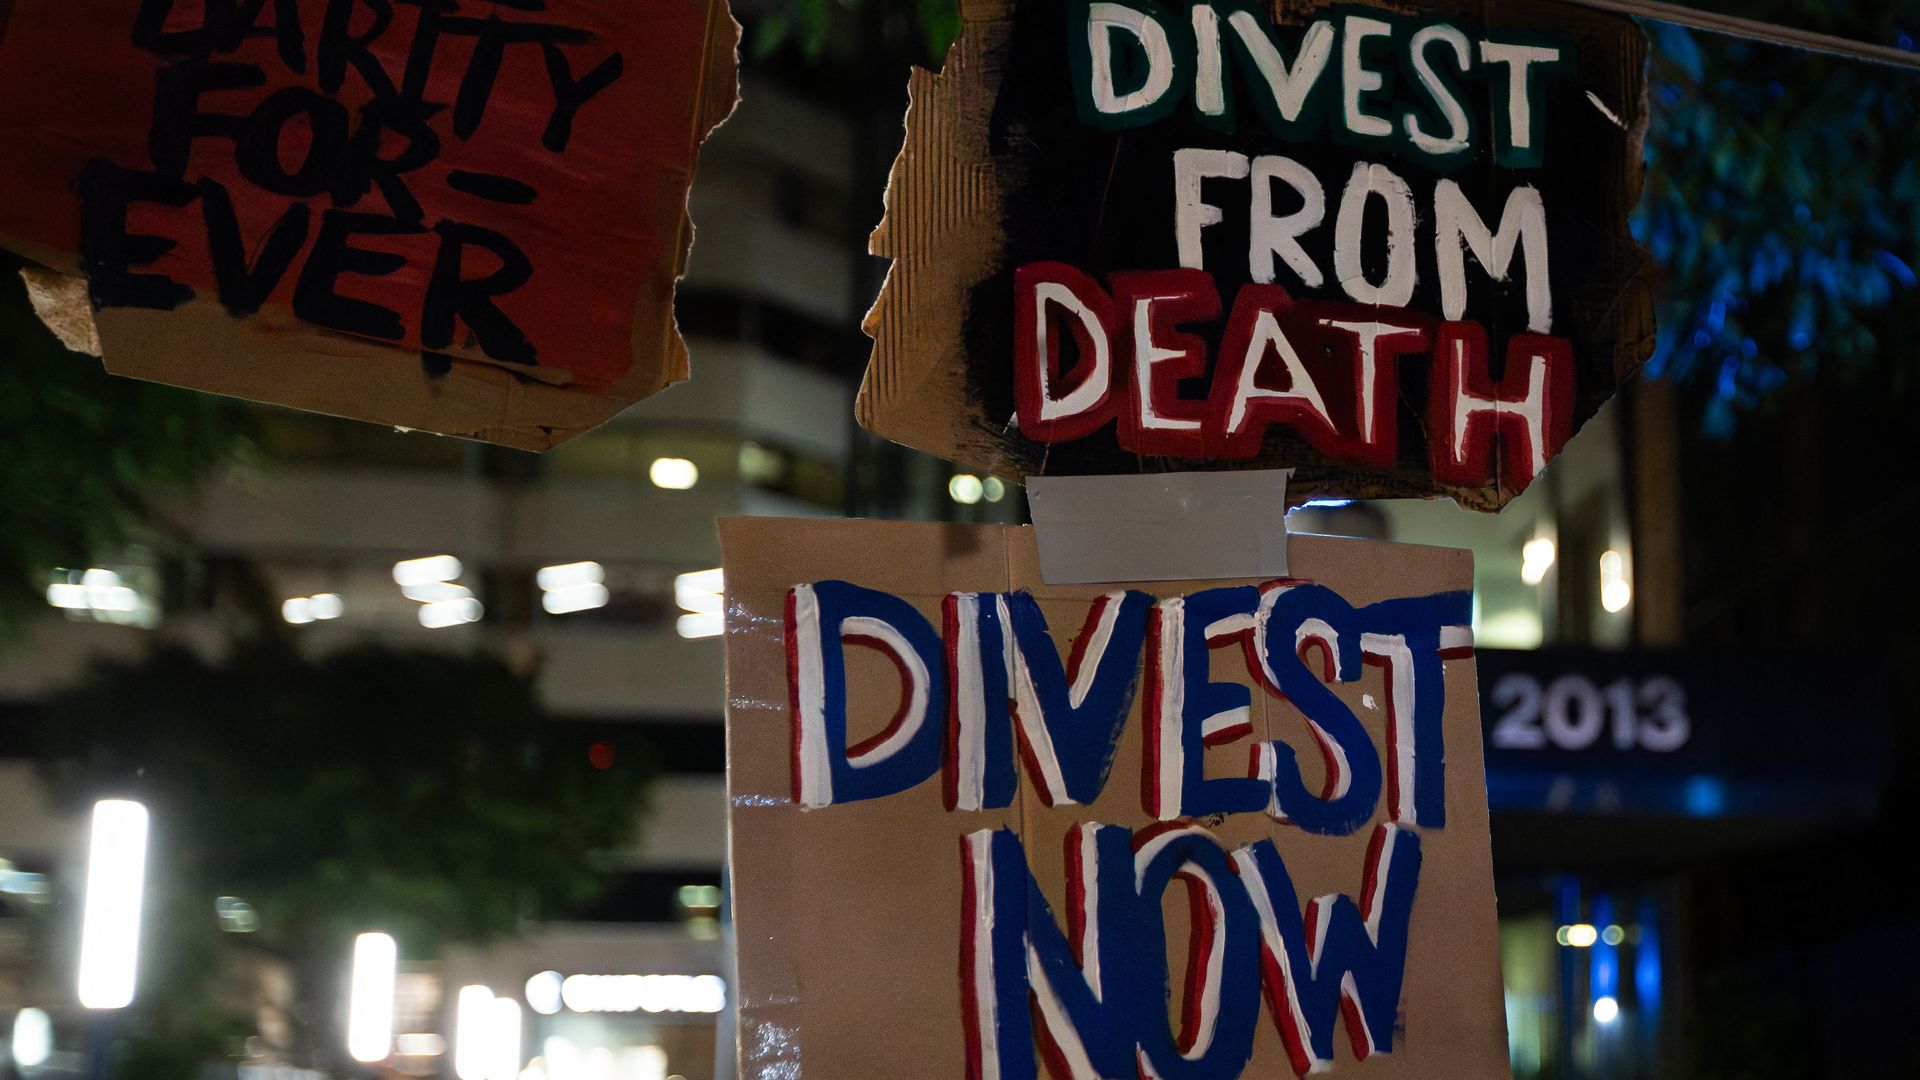 Signs reading "Divest from death" and "Divest now" hang at George Washington University's encampment of student protestors.